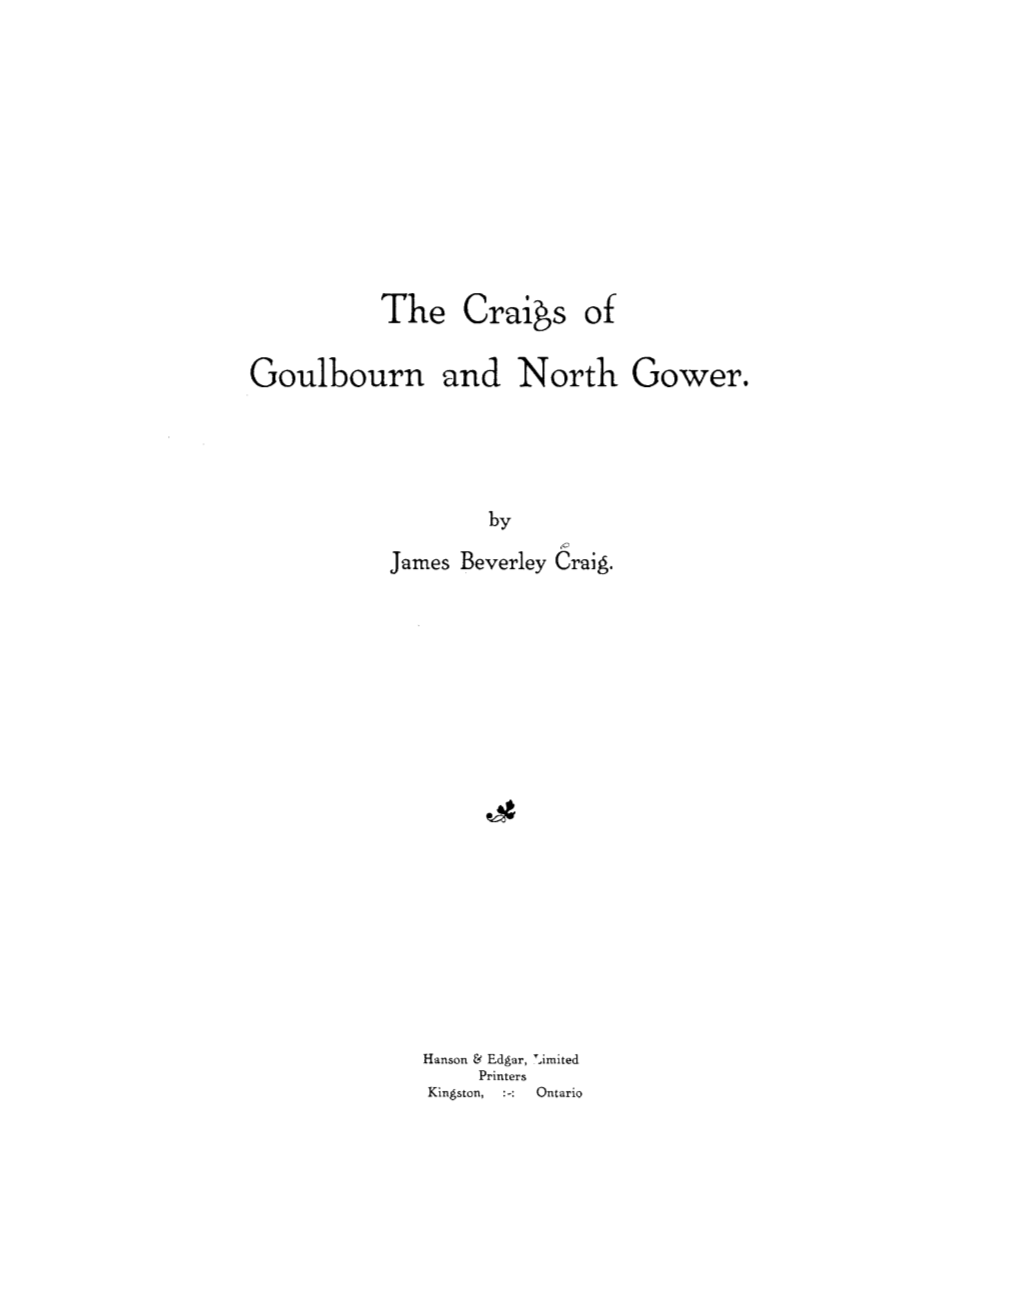 The Crai3s of Goulbourn and North Gower